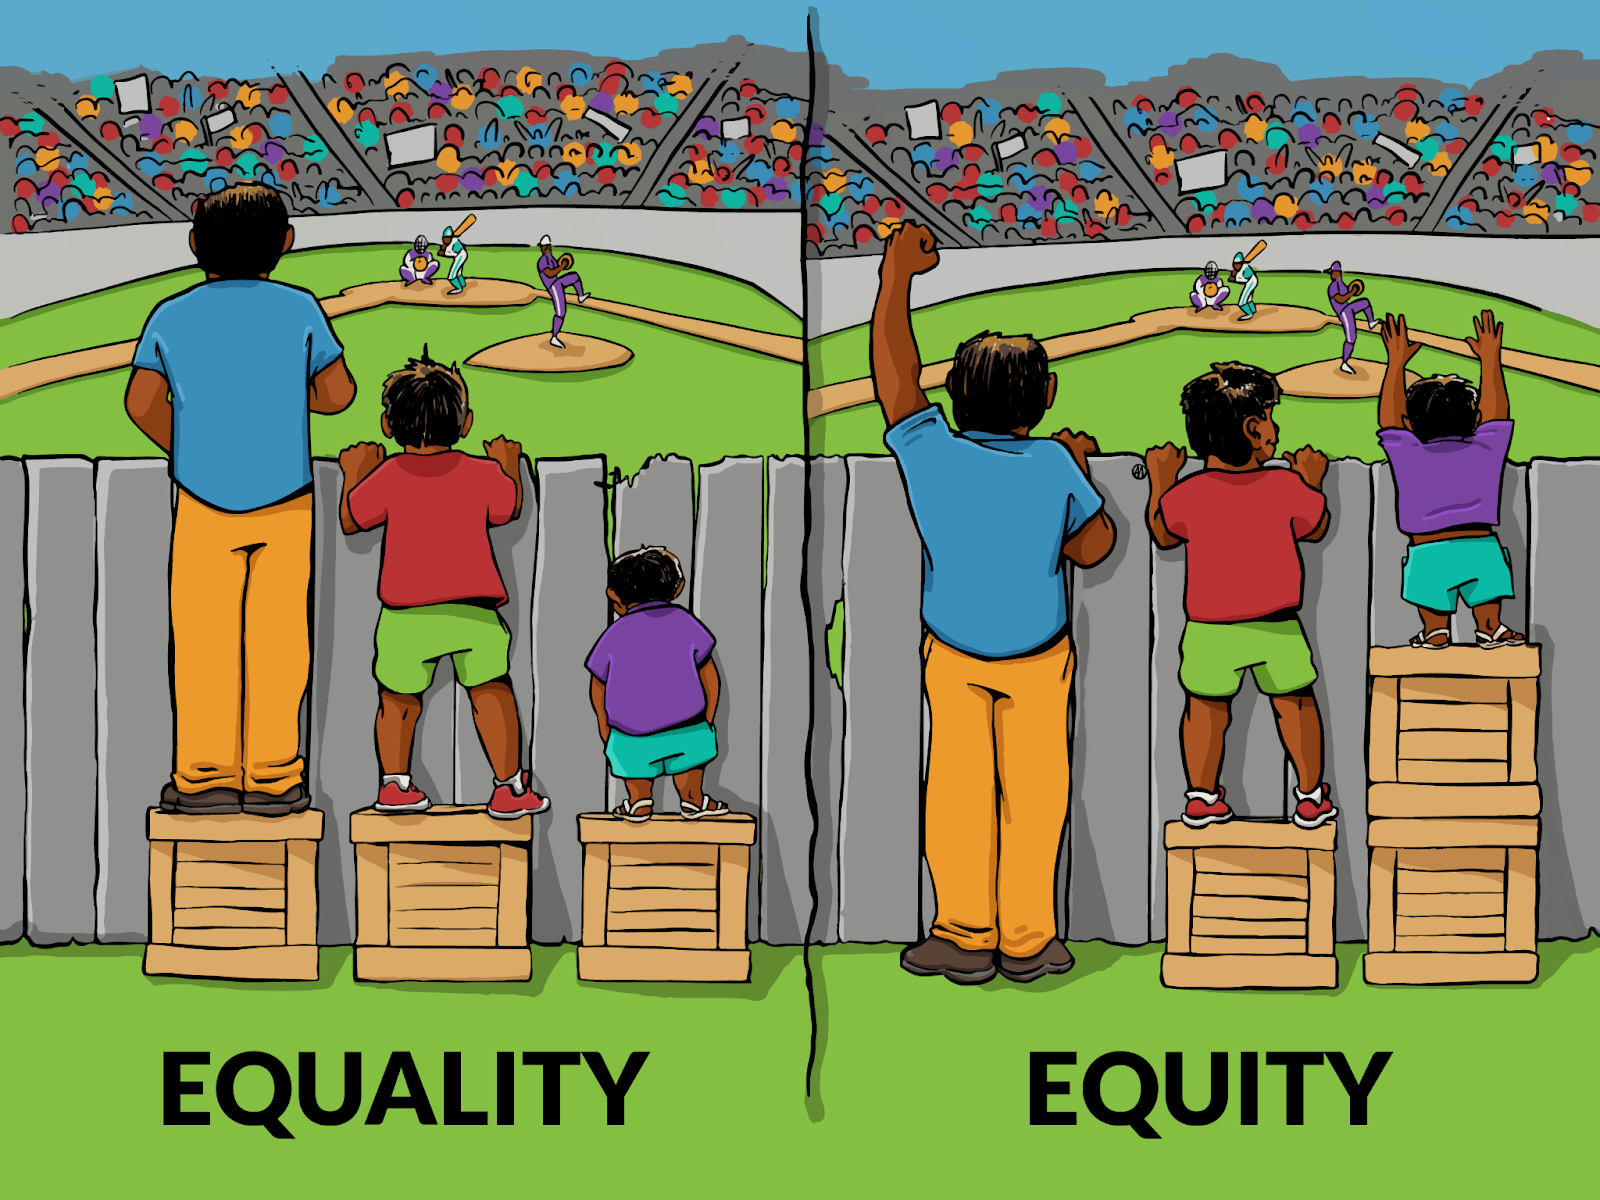 A comic-style drawing of three people of different height trying to watch a baseball game over a fence. In the left panel, labeled quality, each person is standing on a box, but only the tall and medium height person can watch the game, whereas the shortest (and youngest) cannot see. In the second panel, labeled equity, the boxes are rearranged that the shortest person stands on two stacked boxes and the tallest person stands on the ground, bringing them all to roughly equal height and allowing all of them to just watch over the fence.